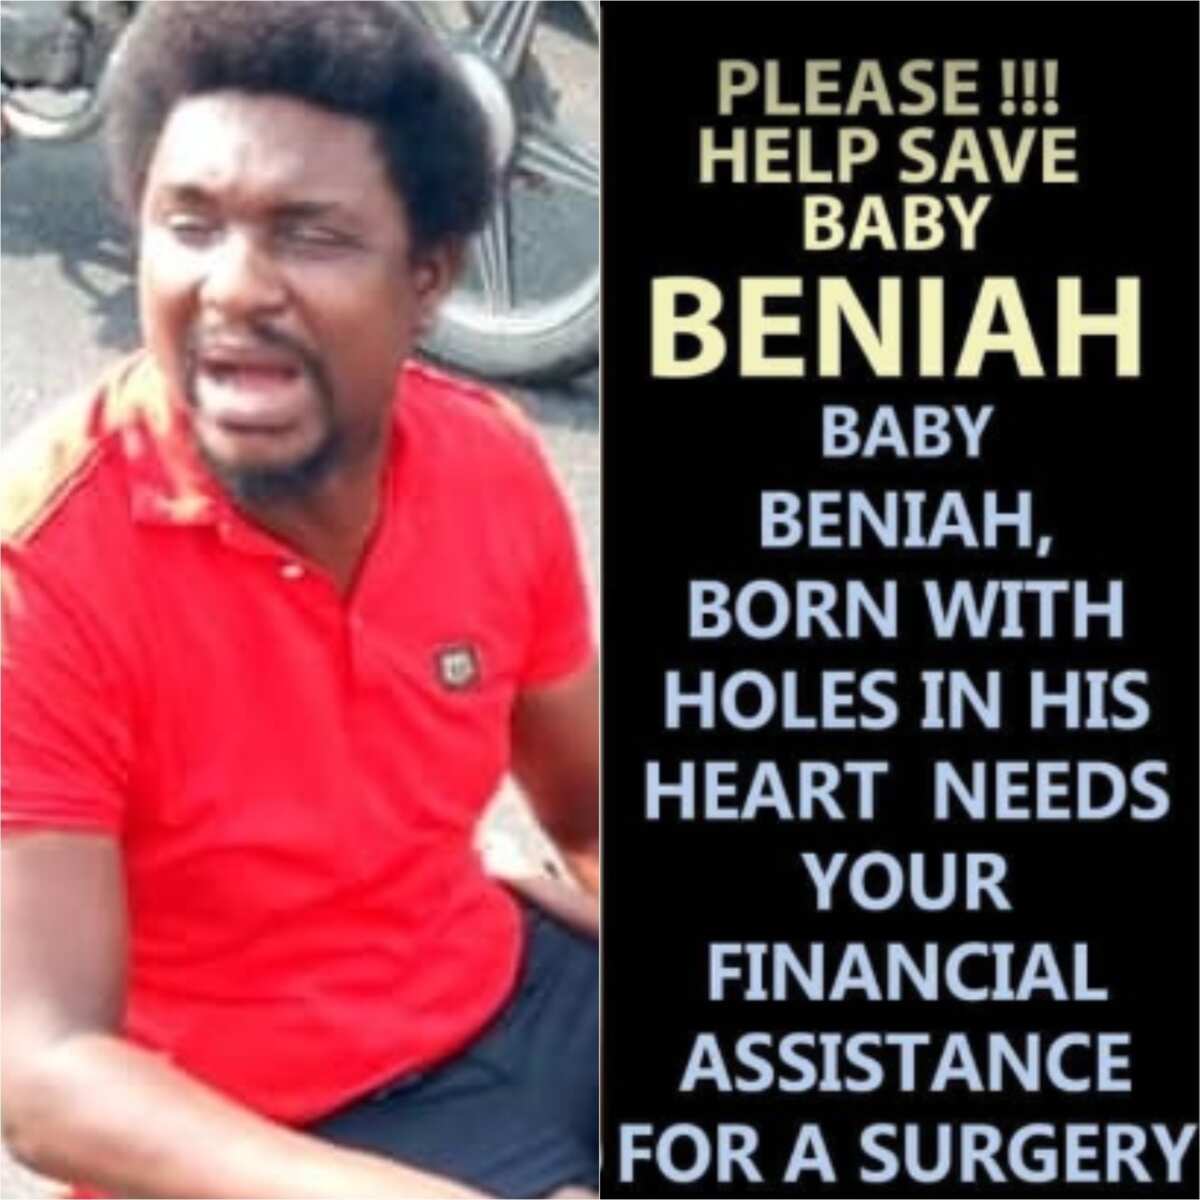 Tragic! Boy with hole in heart whom Nigerians donated over 70m for reportedly passes on